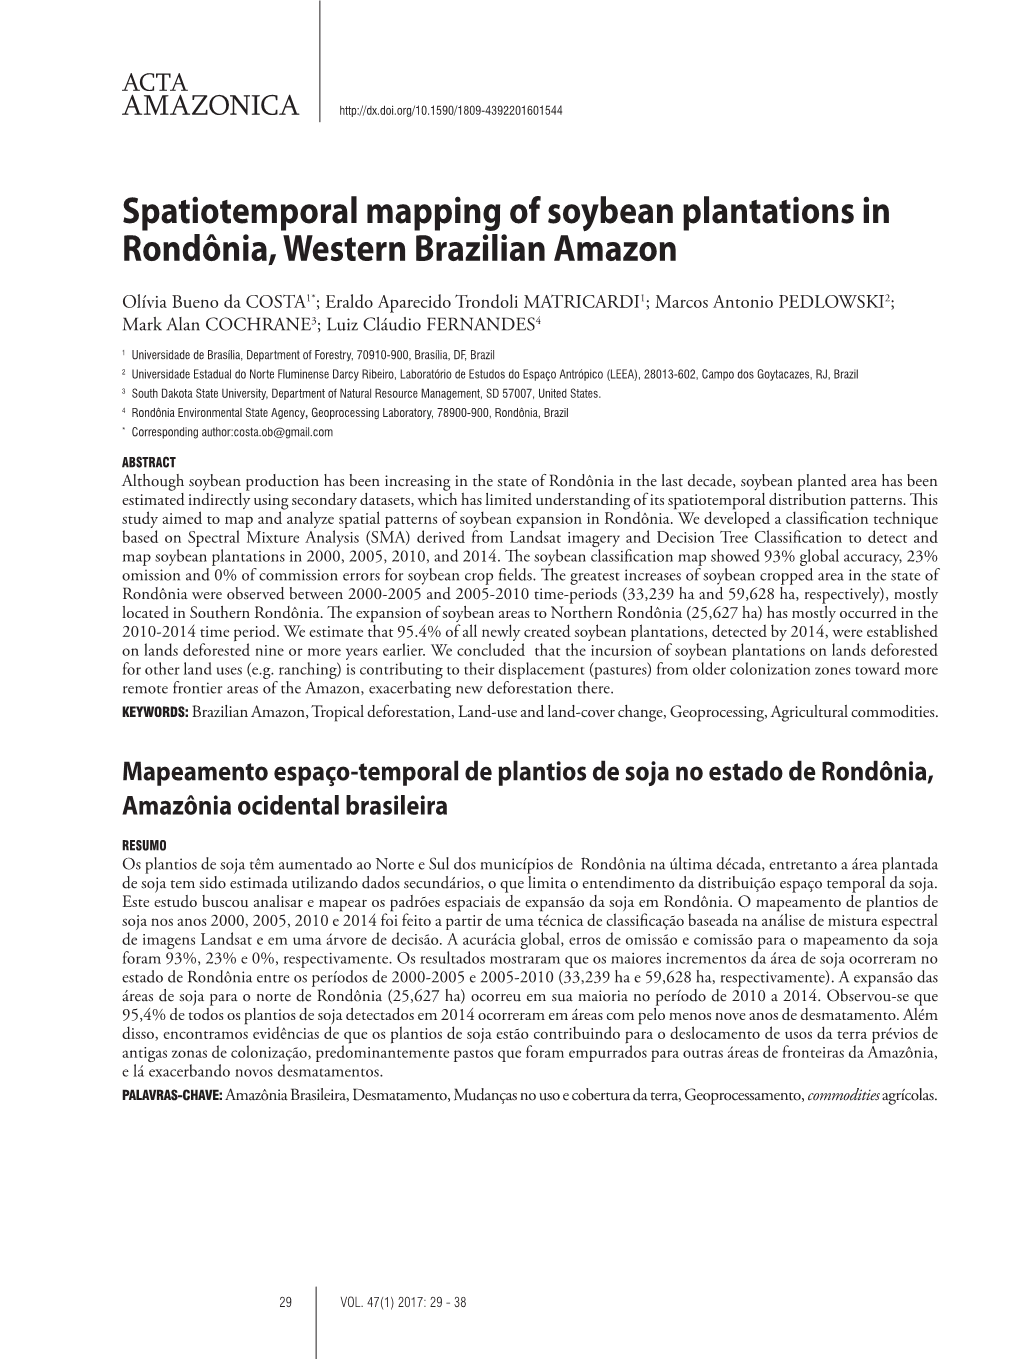 Spatiotemporal Mapping of Soybean Plantations in Rondônia, Western Brazilian Amazon